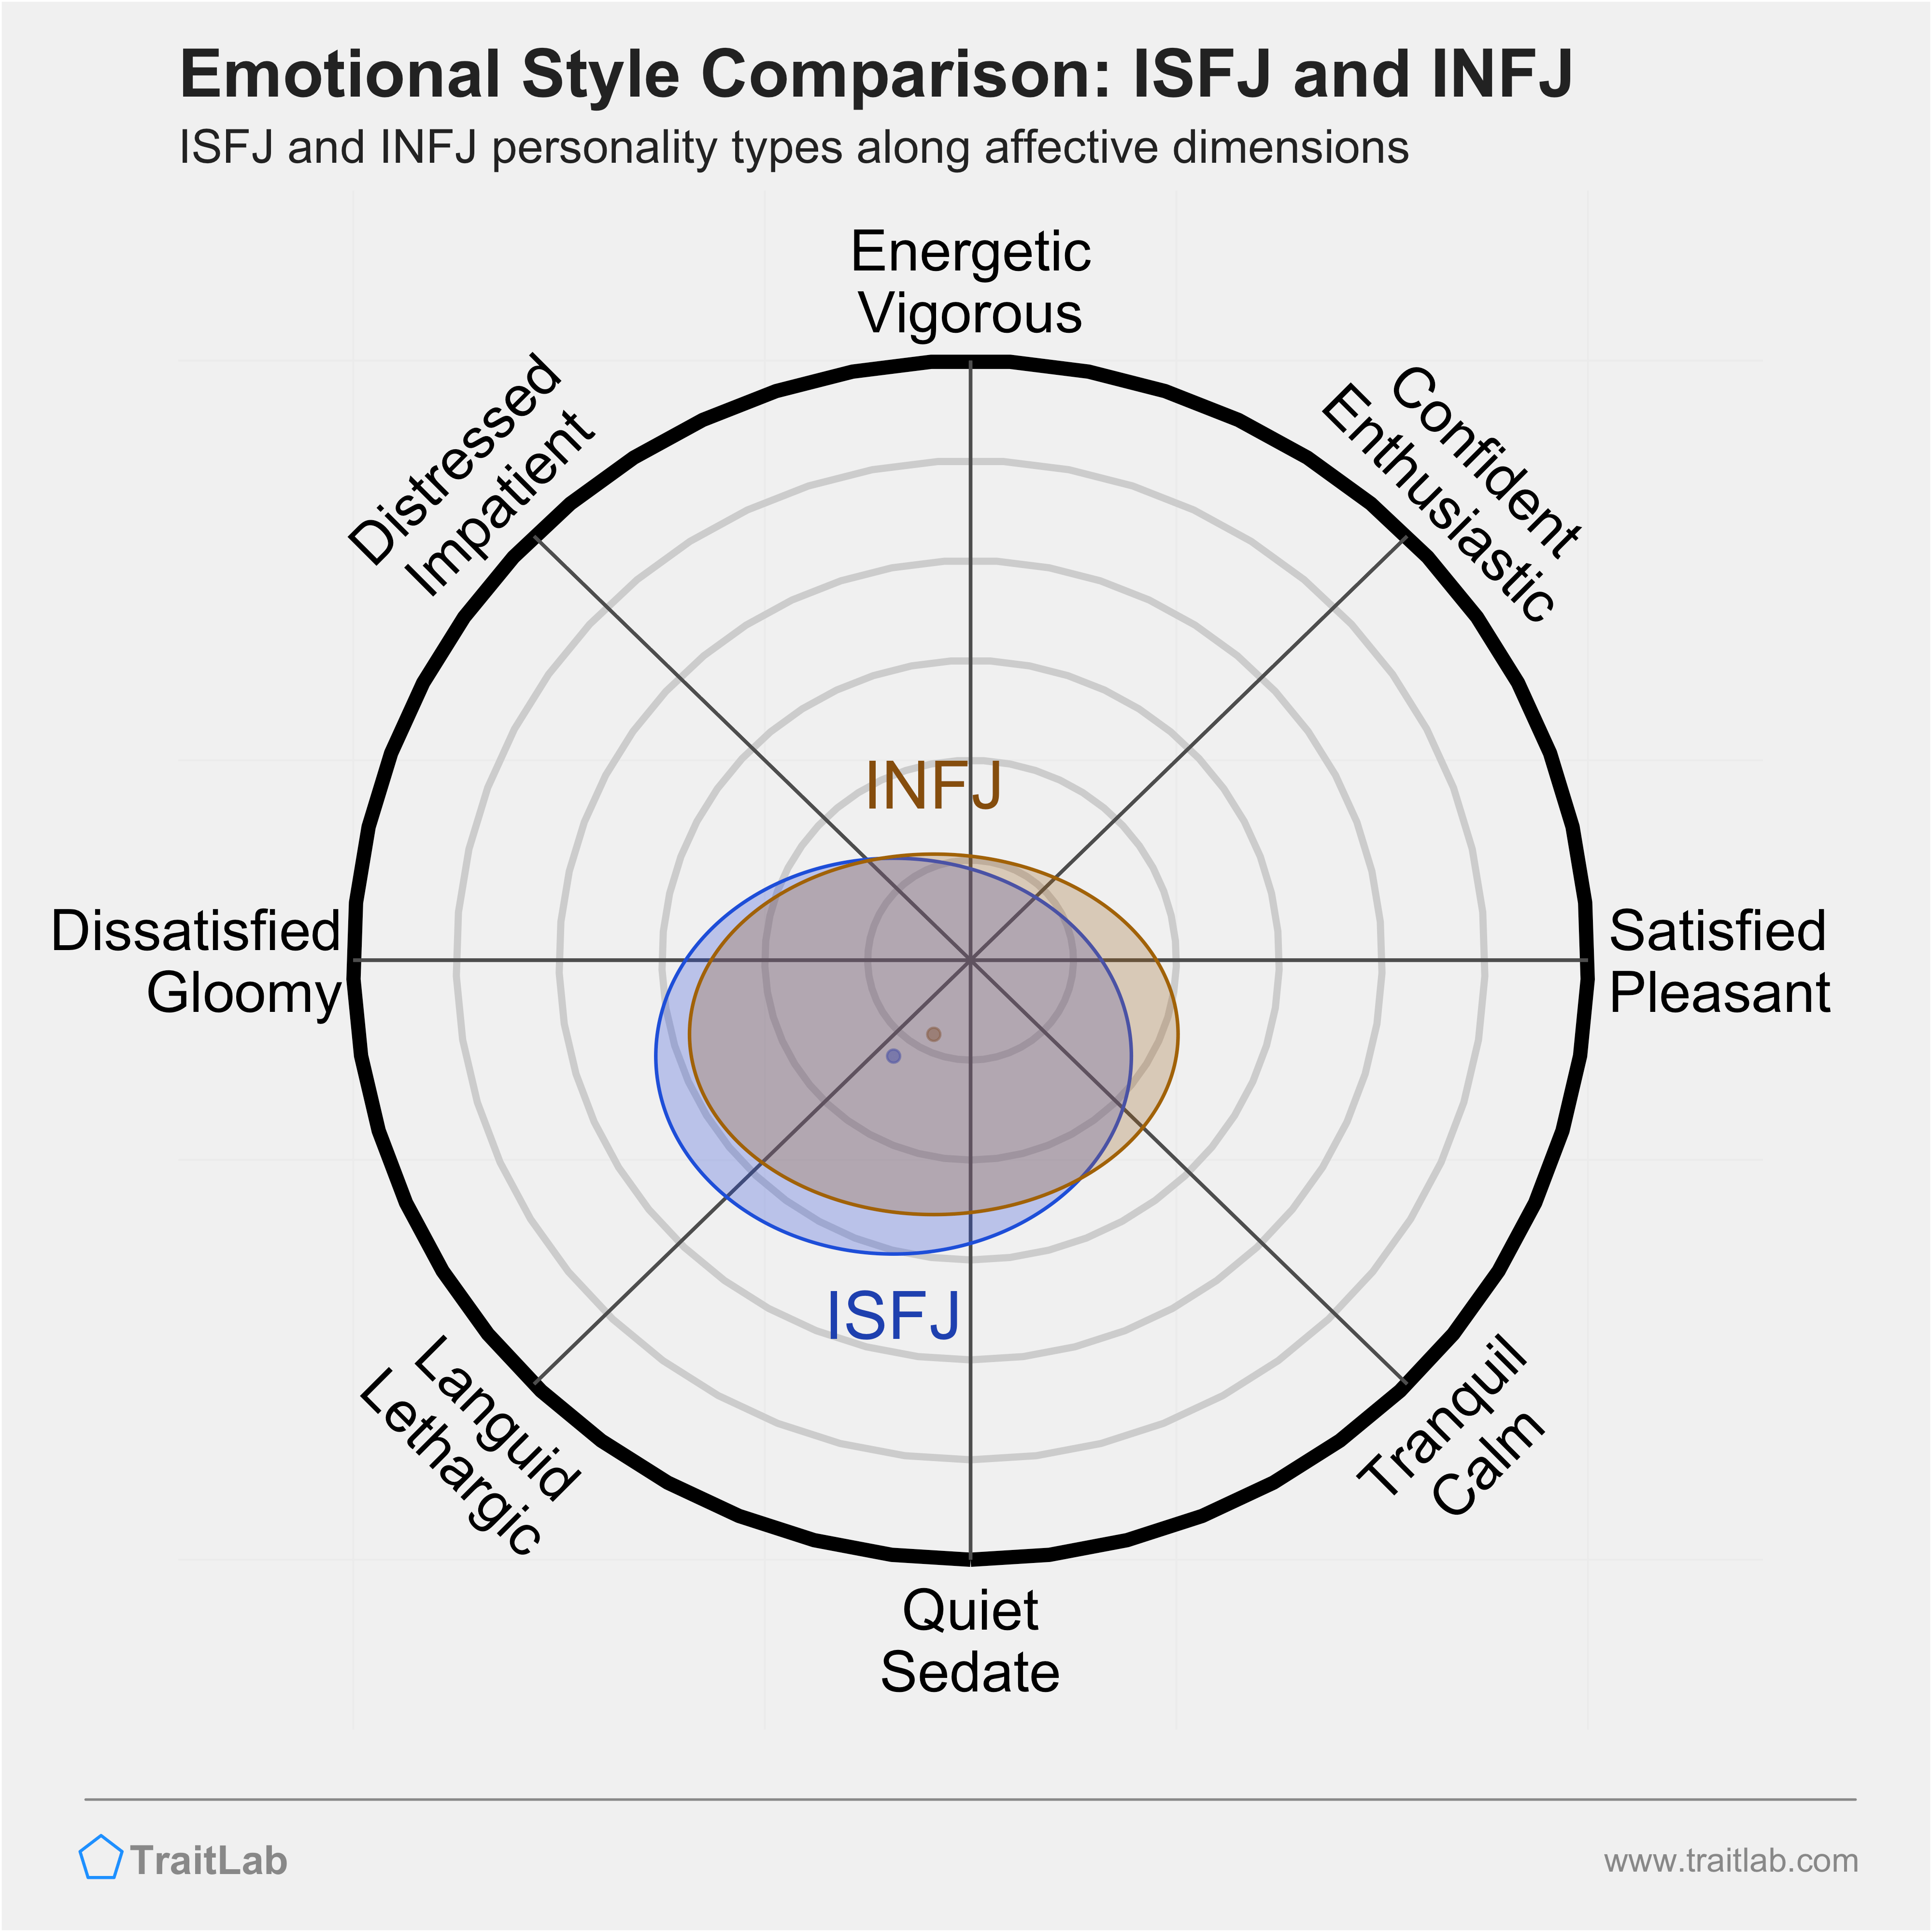 ISFJ and INFJ comparison across emotional (affective) dimensions